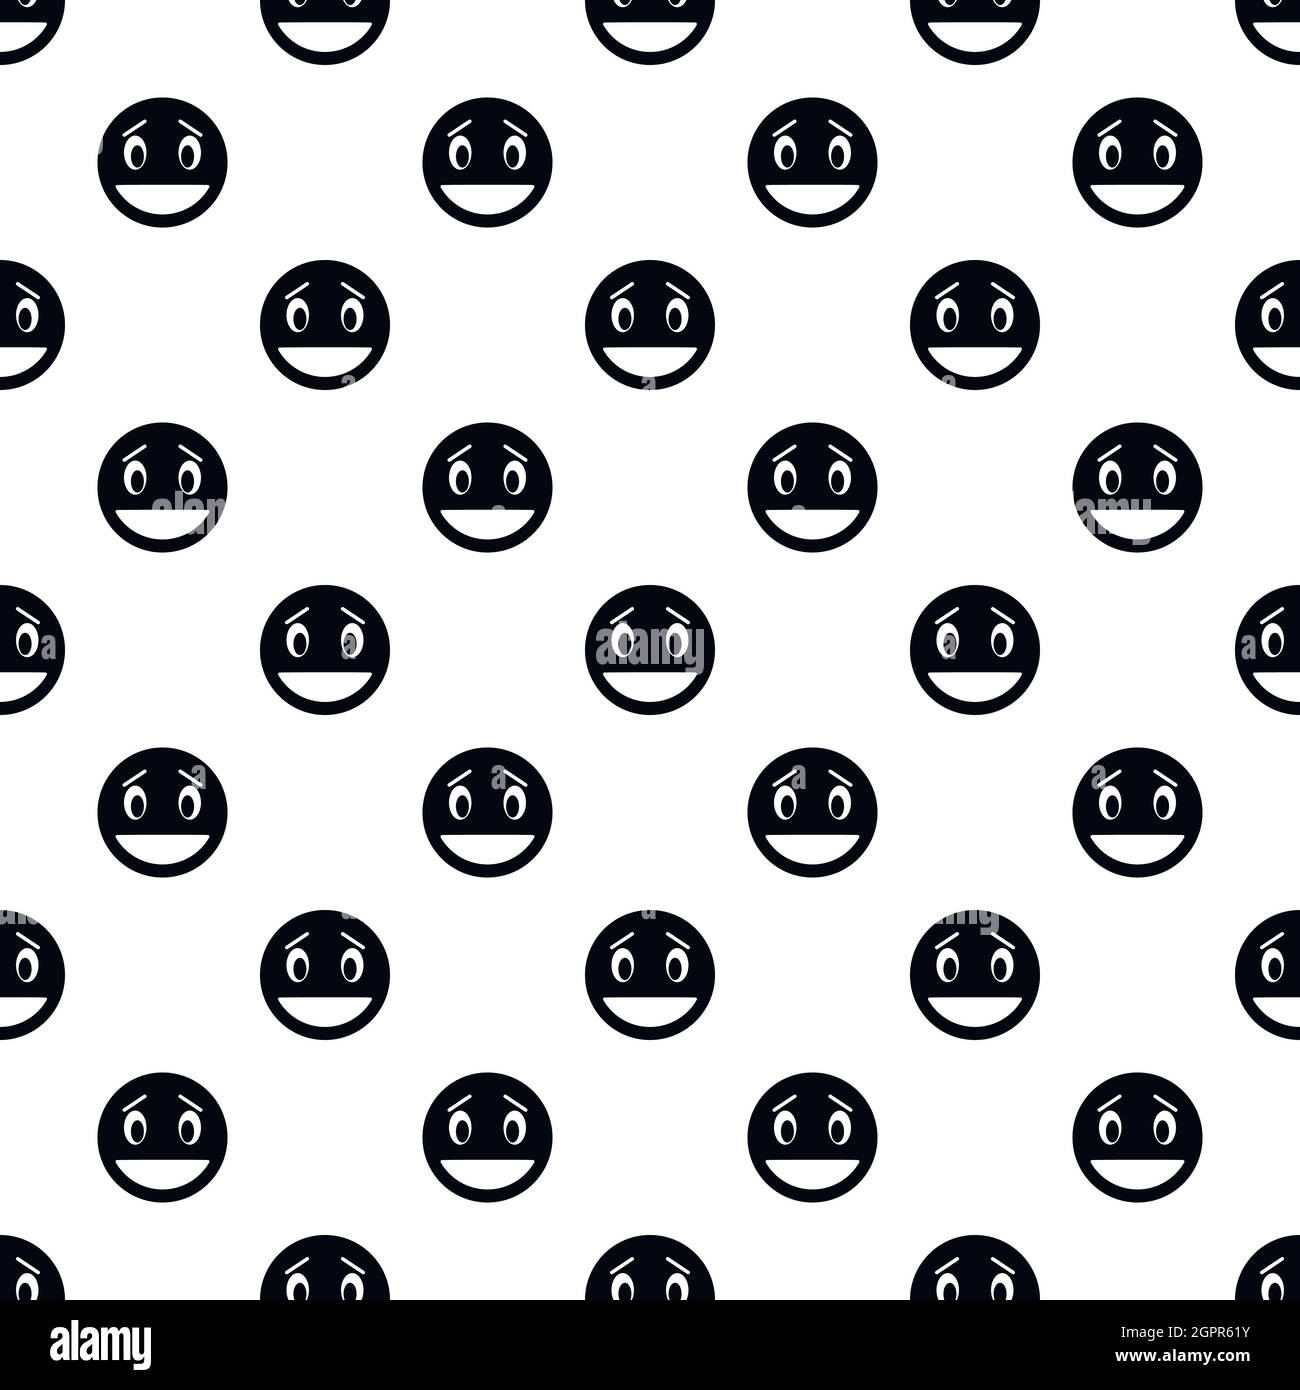 Laughing smiley face pattern, simple style Stock Vector